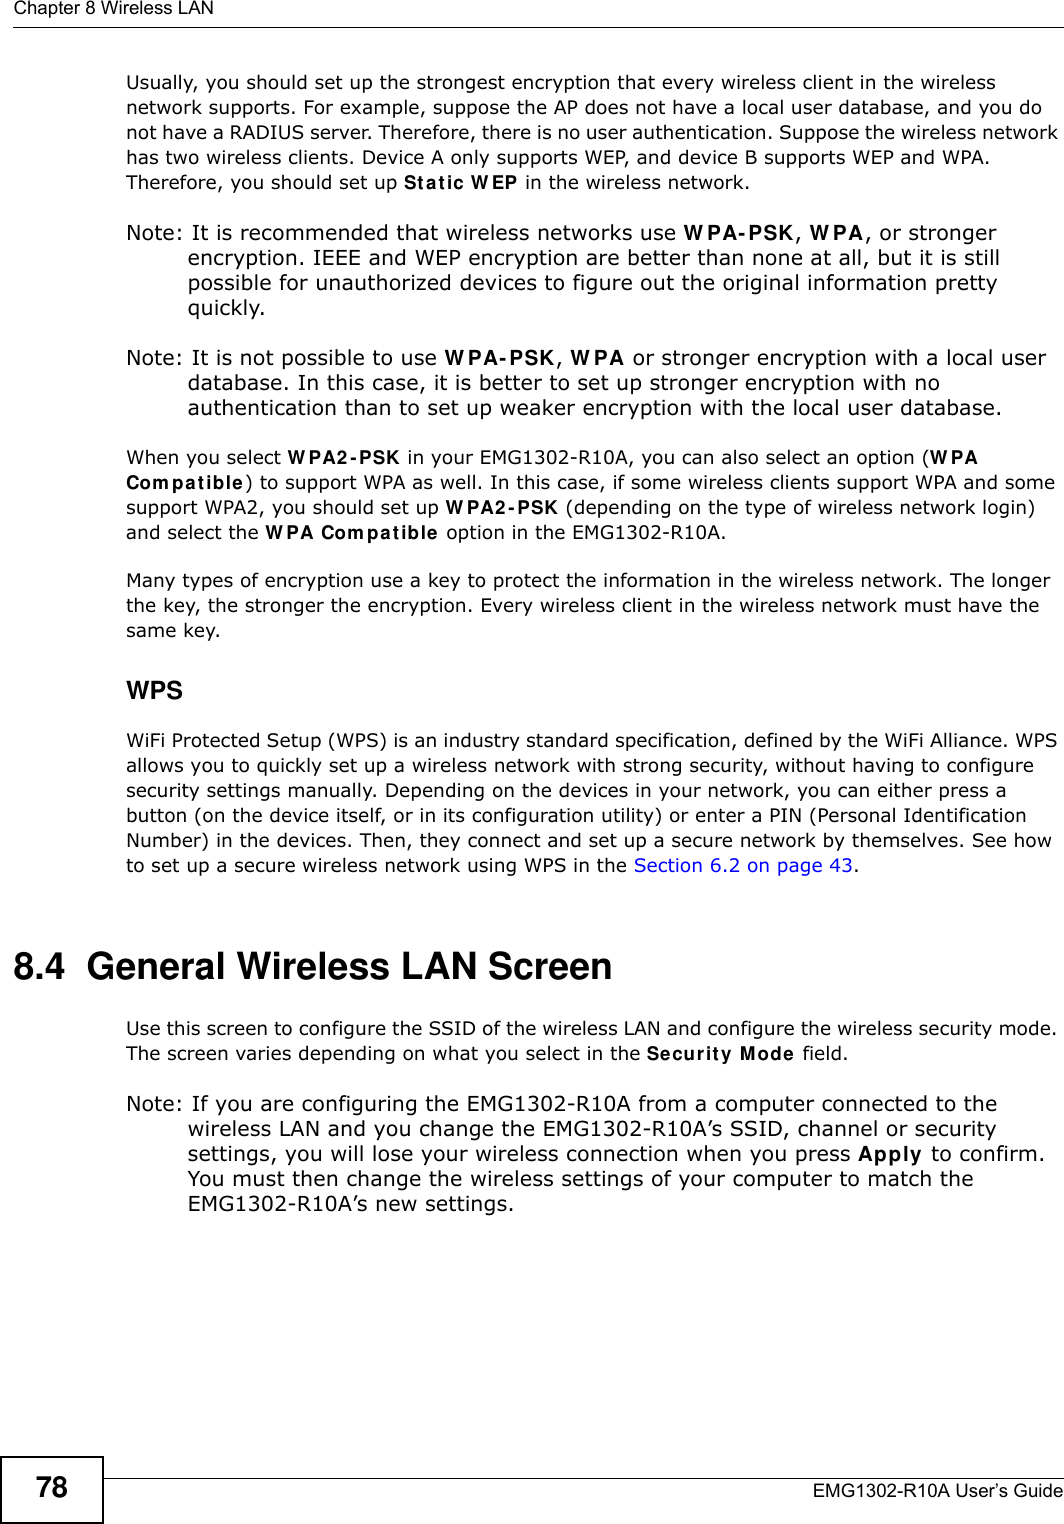 Chapter 8 Wireless LANEMG1302-R10A User’s Guide78Usually, you should set up the strongest encryption that every wireless client in the wireless network supports. For example, suppose the AP does not have a local user database, and you do not have a RADIUS server. Therefore, there is no user authentication. Suppose the wireless network has two wireless clients. Device A only supports WEP, and device B supports WEP and WPA. Therefore, you should set up St a t ic W EP in the wireless network.Note: It is recommended that wireless networks use W PA- PSK, W PA, or stronger encryption. IEEE and WEP encryption are better than none at all, but it is still possible for unauthorized devices to figure out the original information pretty quickly.Note: It is not possible to use W PA- PSK, W PA or stronger encryption with a local user database. In this case, it is better to set up stronger encryption with no authentication than to set up weaker encryption with the local user database.When you select W PA2 - PSK in your EMG1302-R10A, you can also select an option (W PA Com p at ible ) to support WPA as well. In this case, if some wireless clients support WPA and some support WPA2, you should set up W PA2 - PSK (depending on the type of wireless network login) and select the W PA Com pat ible  option in the EMG1302-R10A.Many types of encryption use a key to protect the information in the wireless network. The longer the key, the stronger the encryption. Every wireless client in the wireless network must have the same key.WPSWiFi Protected Setup (WPS) is an industry standard specification, defined by the WiFi Alliance. WPS allows you to quickly set up a wireless network with strong security, without having to configure security settings manually. Depending on the devices in your network, you can either press a button (on the device itself, or in its configuration utility) or enter a PIN (Personal Identification Number) in the devices. Then, they connect and set up a secure network by themselves. See how to set up a secure wireless network using WPS in the Section 6.2 on page 43. 8.4  General Wireless LAN Screen Use this screen to configure the SSID of the wireless LAN and configure the wireless security mode. The screen varies depending on what you select in the Se curit y M ode field.Note: If you are configuring the EMG1302-R10A from a computer connected to the wireless LAN and you change the EMG1302-R10A’s SSID, channel or security settings, you will lose your wireless connection when you press Apply to confirm. You must then change the wireless settings of your computer to match the EMG1302-R10A’s new settings.